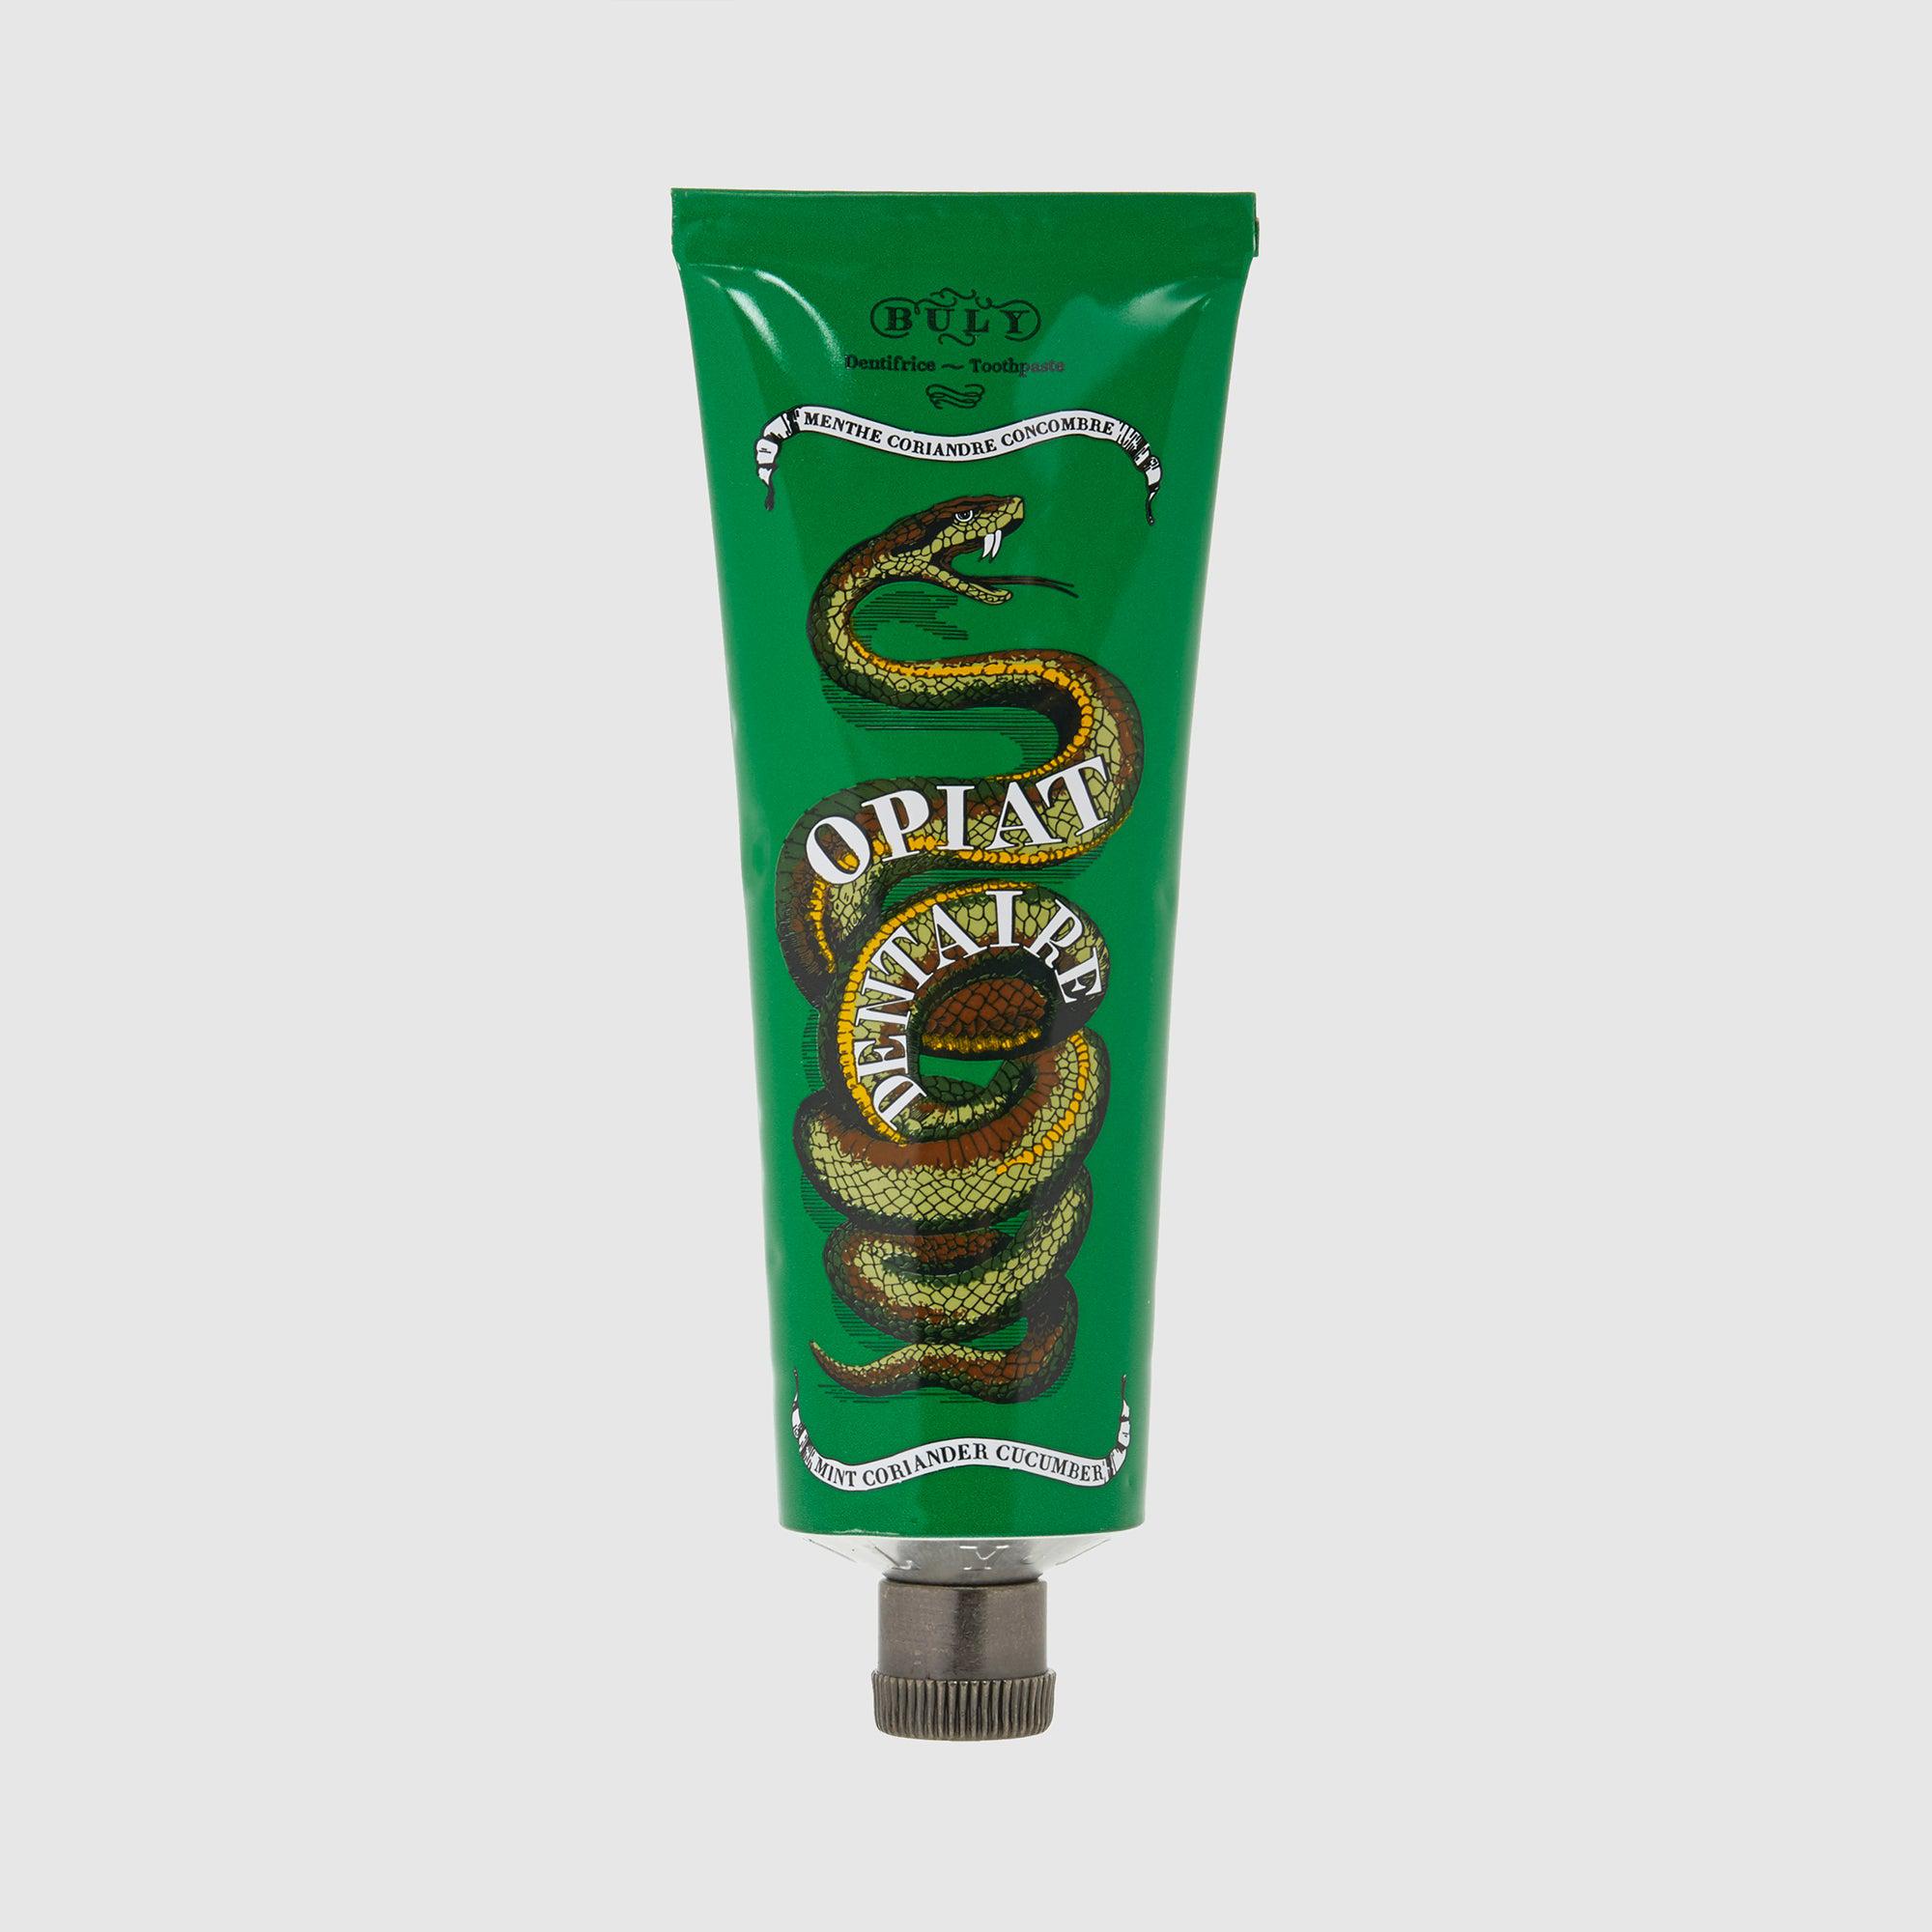 Buly 1803 Opiat Dentaire Mint/Coriander/Cucumber Toothpaste, 75ml by BULY 1803